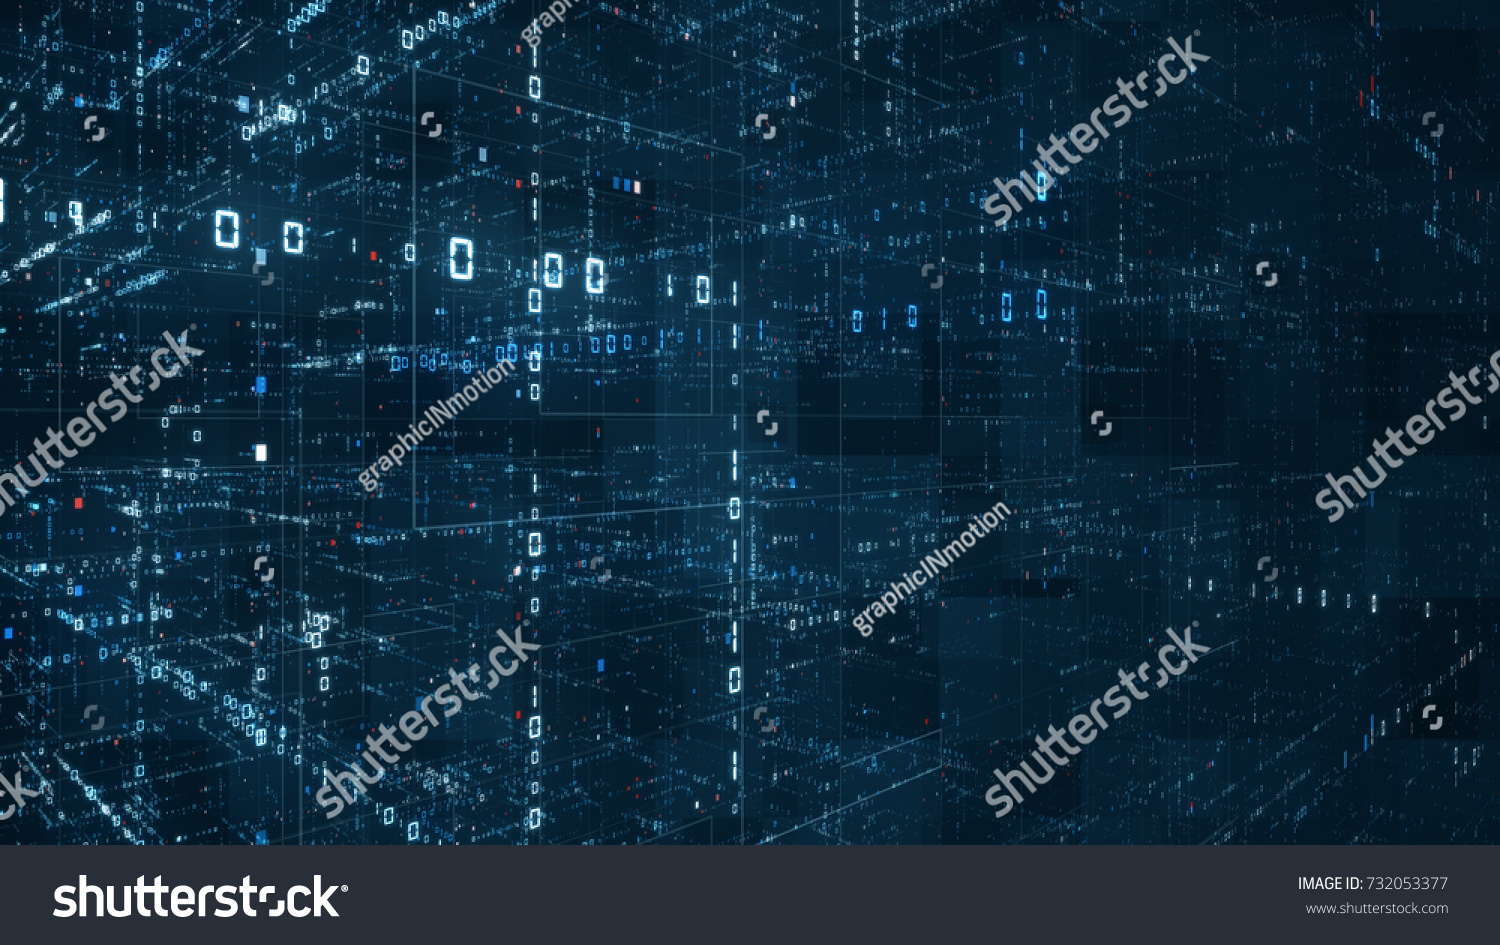 Digital binary code matrix background - 3D rendering of a scientific technology data binary code network conveying connectivity, complexity and data flood of modern digital age #732053377